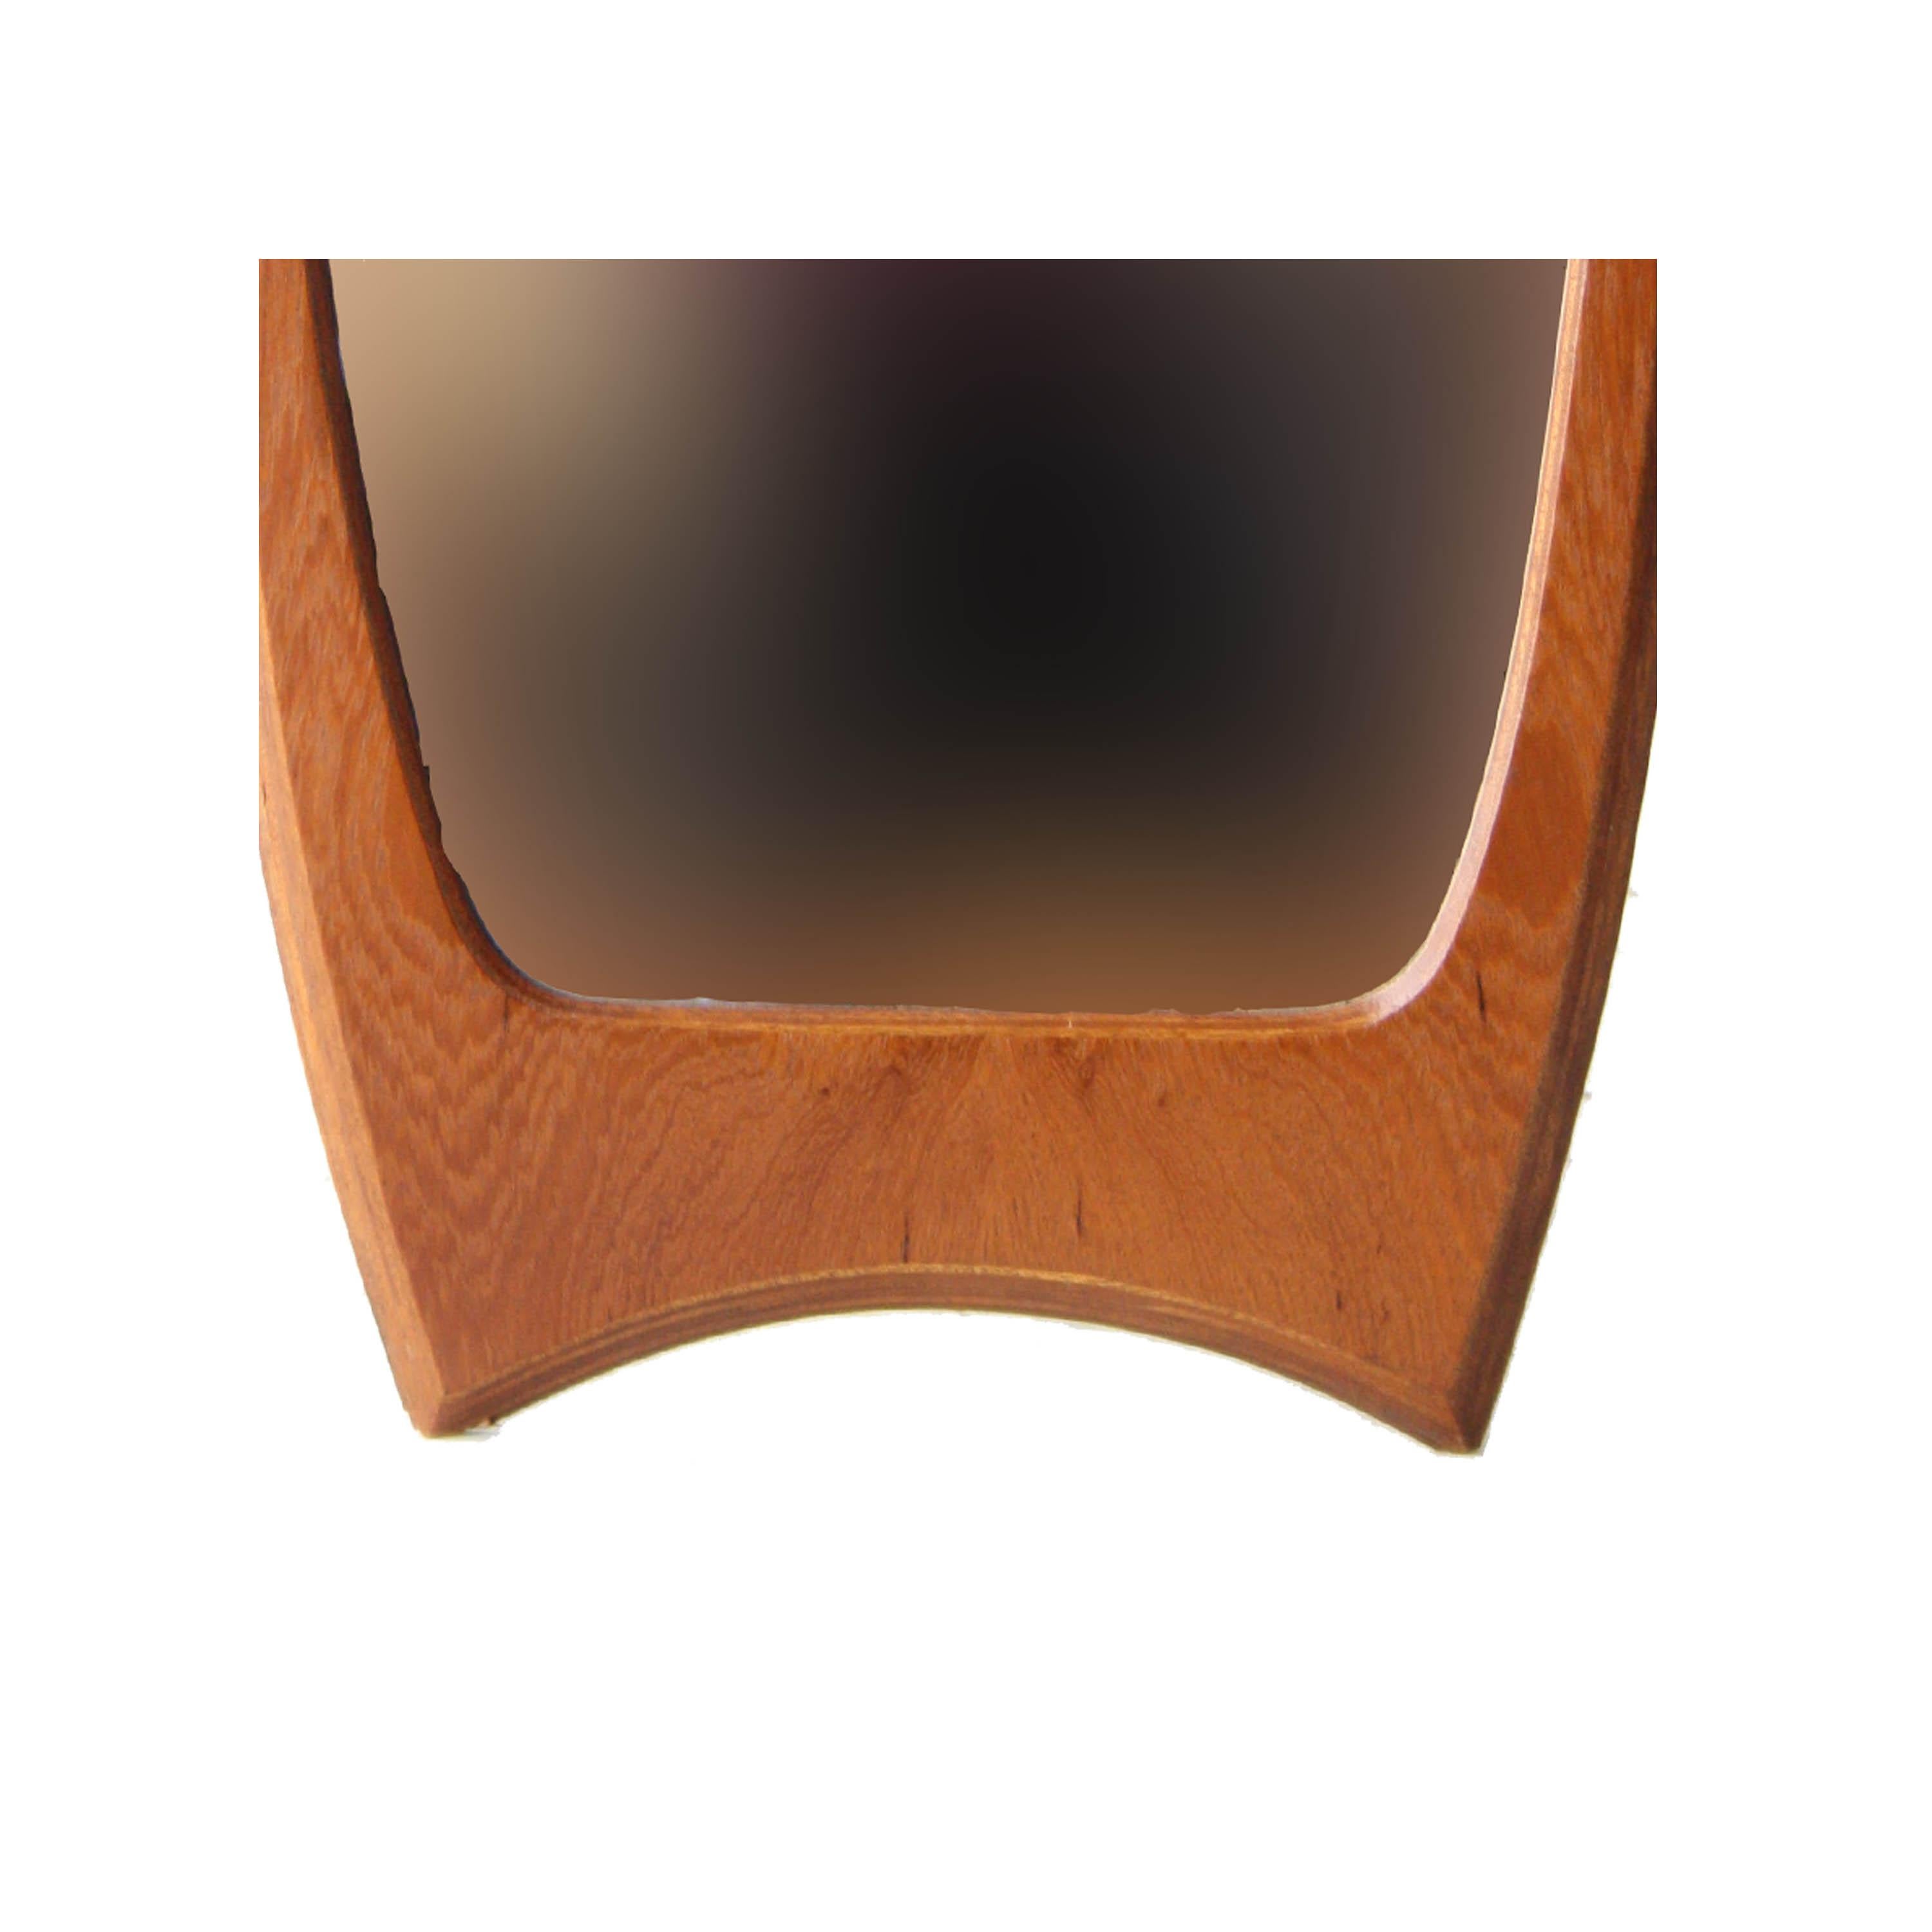 French Mirror Made of Teak Wood, France, 1950